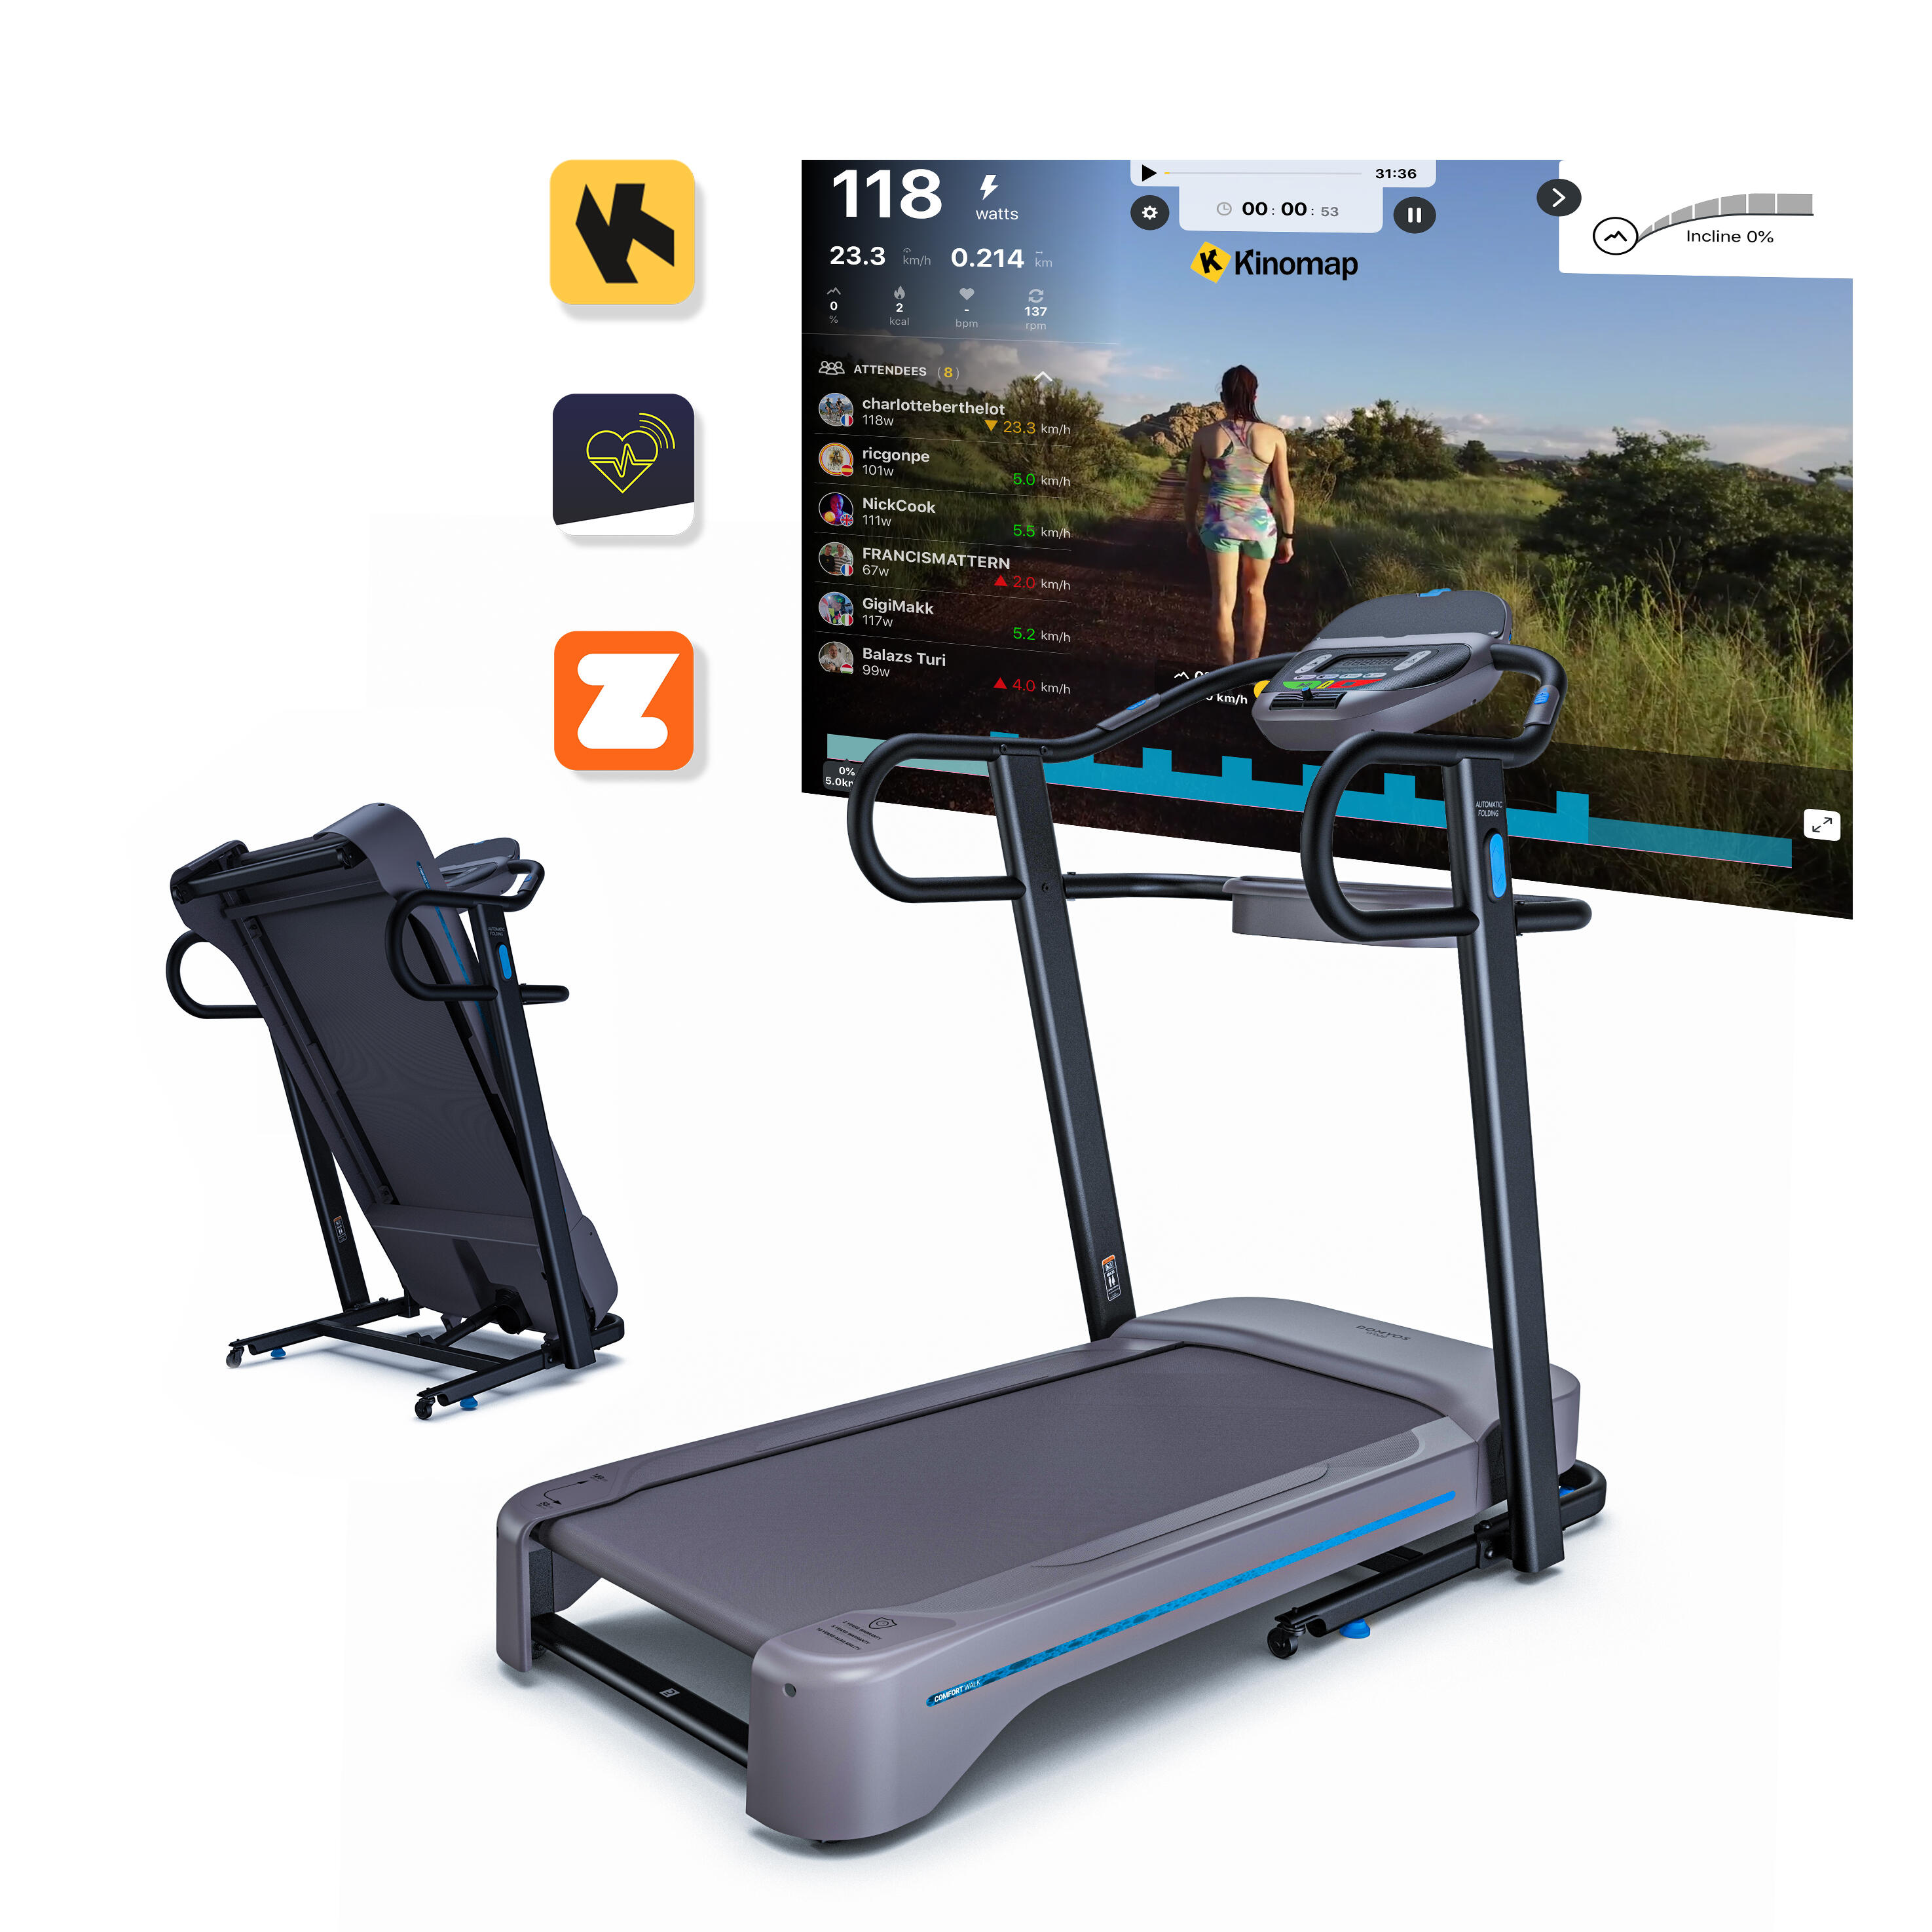 Extra Comforable Connected Walking treadmill W900 - 6mph